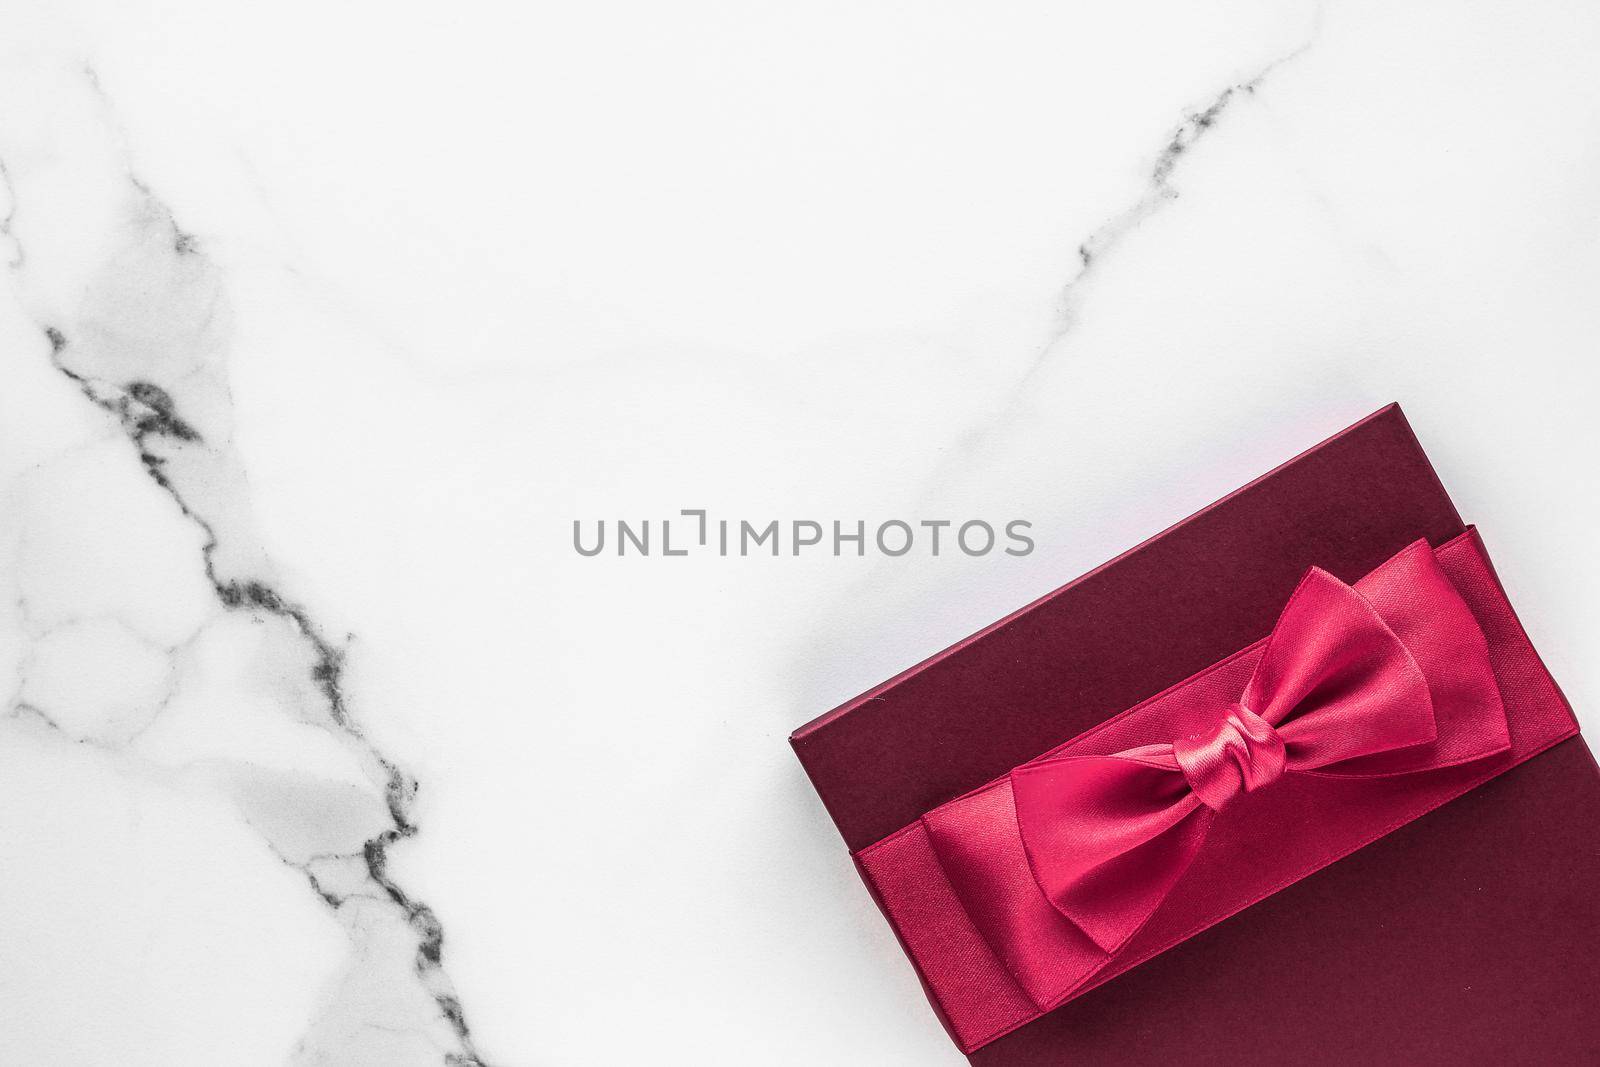 Wedding present, shop sale promotion and love celebration concept - Gift boxes on marble background, holiday flatlay